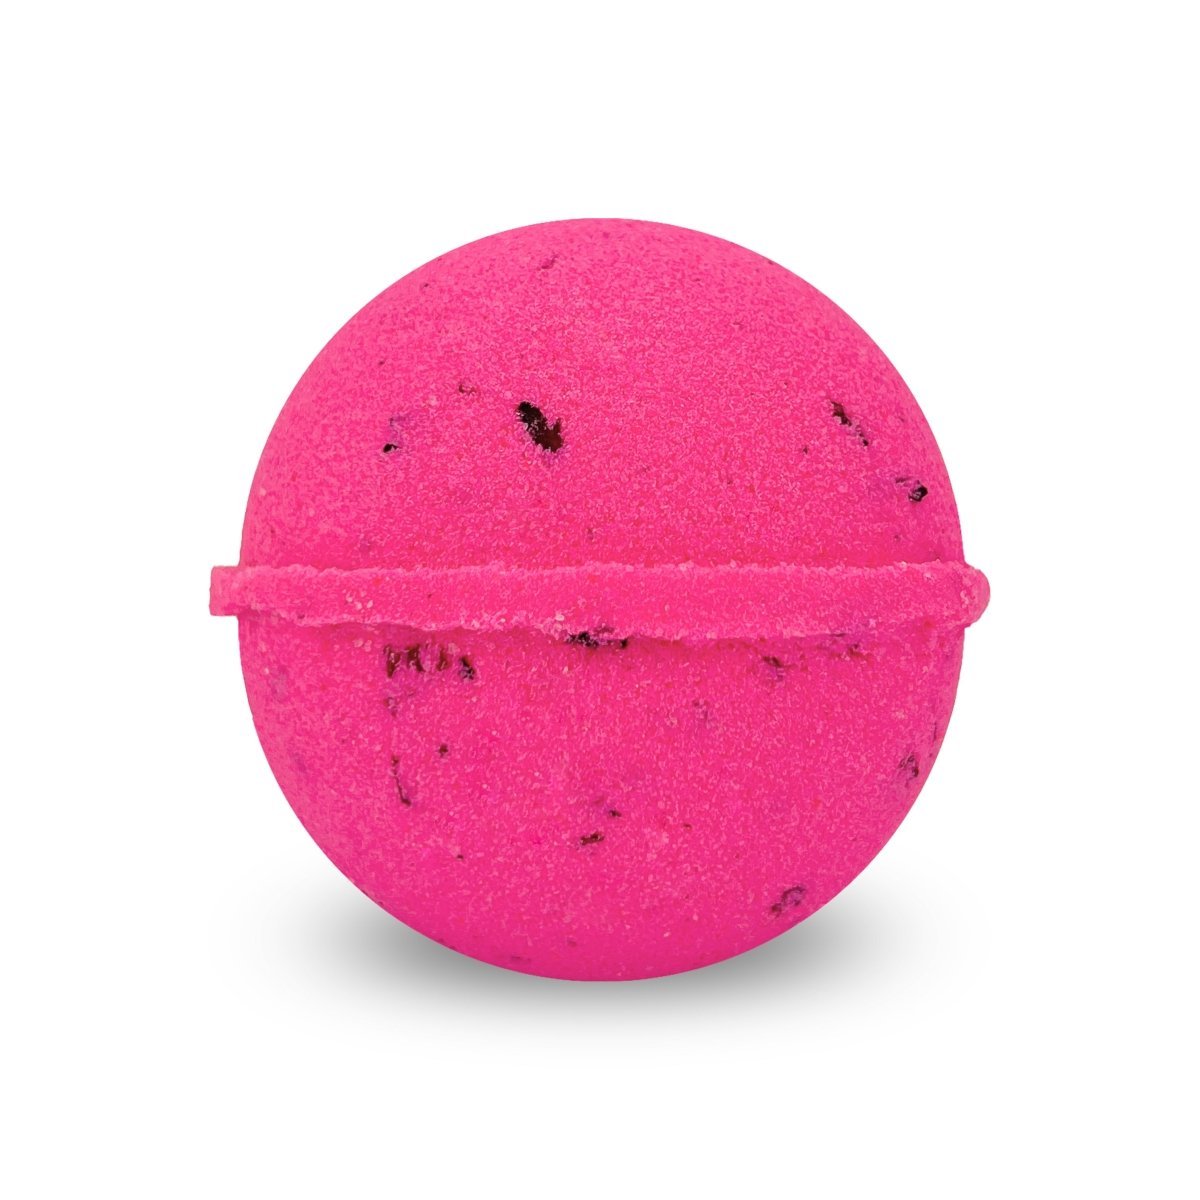 Romance Bath Bomb for Kids & Adults - Aromatherapy Benefits to Relax & Energise Your Mood - Made in Australia by Bath Box